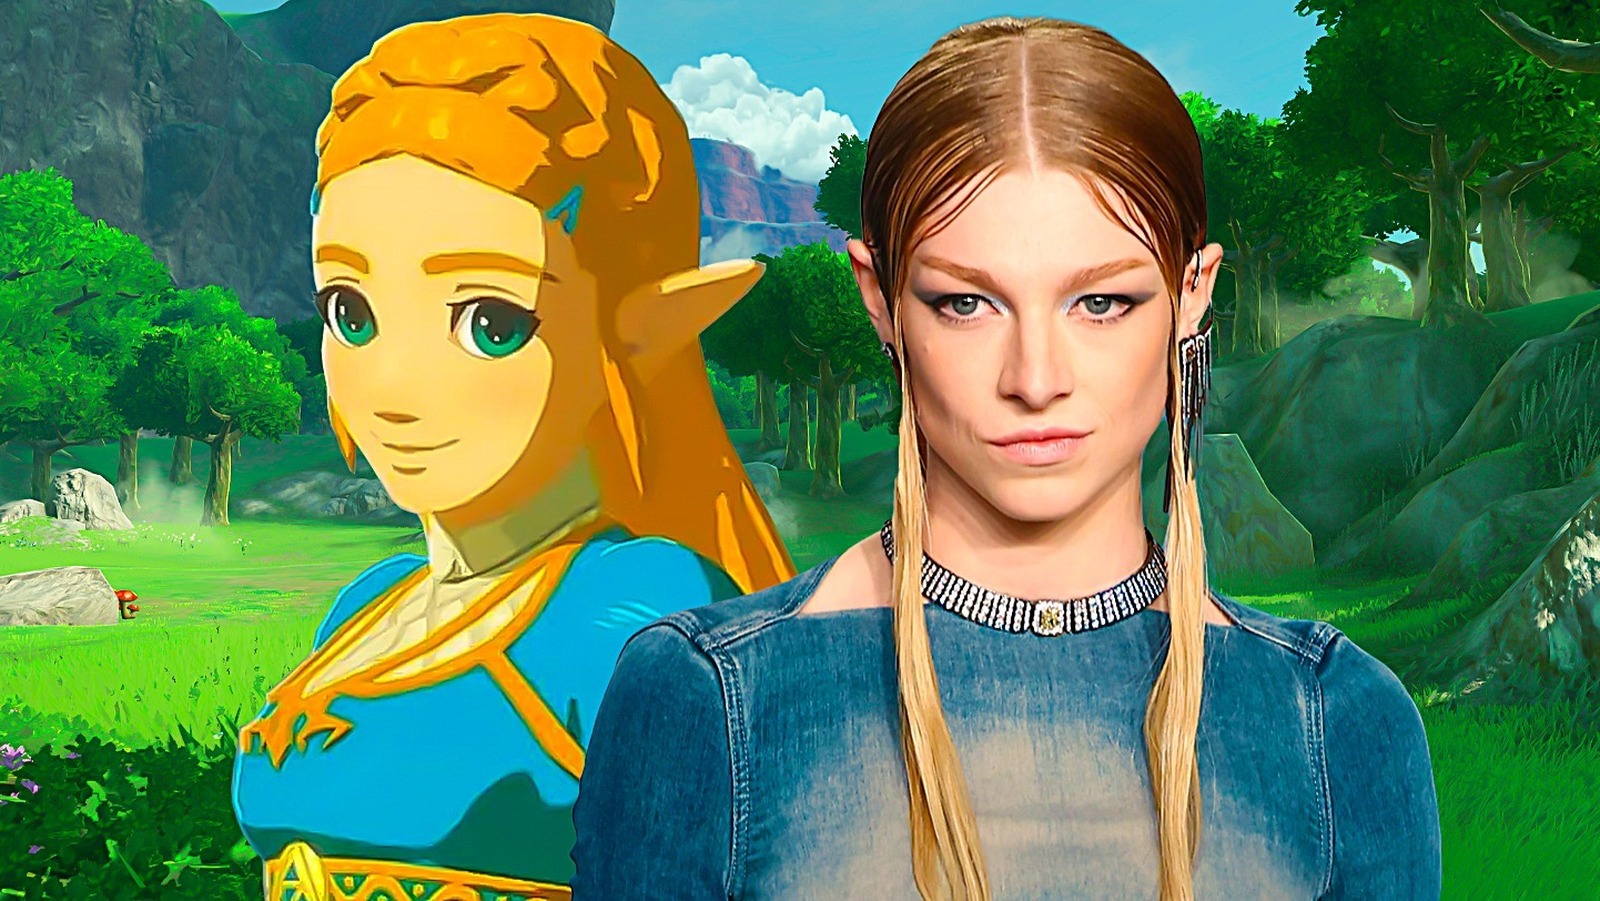 Hunter Schafer wants to play Zelda in the live-action movie